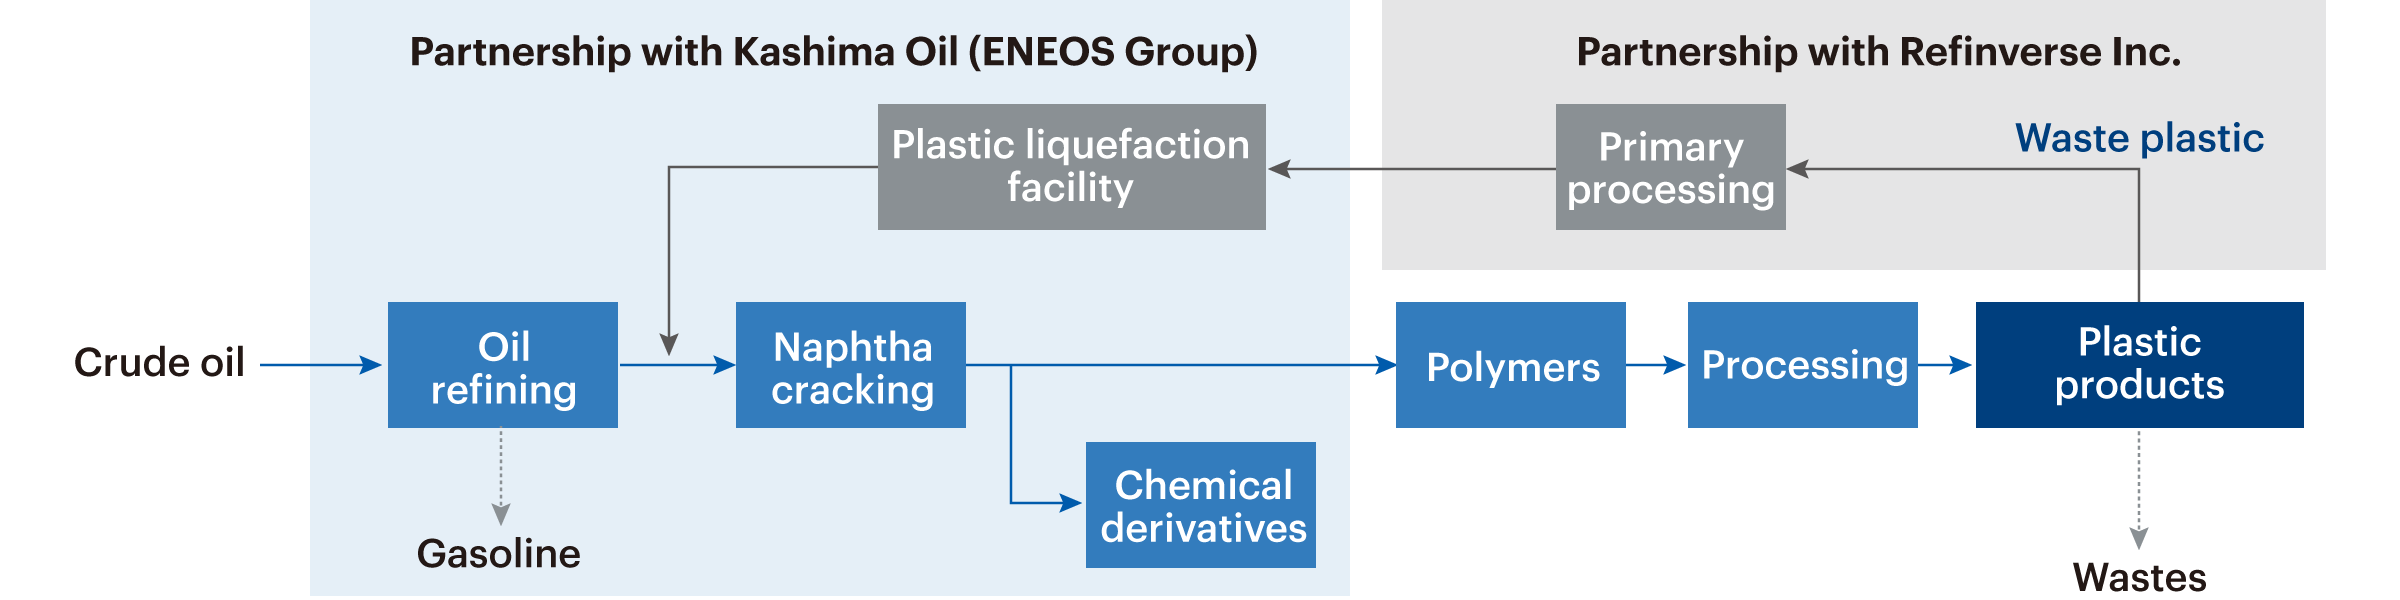 Partnership with Kashima Oil (ENEOS Group) Crude oil Oil refining Gasoline Naphtha cracking Chemical derivatives Polymers Processing Plastic products Wastes Partnership with Refinverse Inc. Waste plastic Primary processing Plastic liquefaction facility